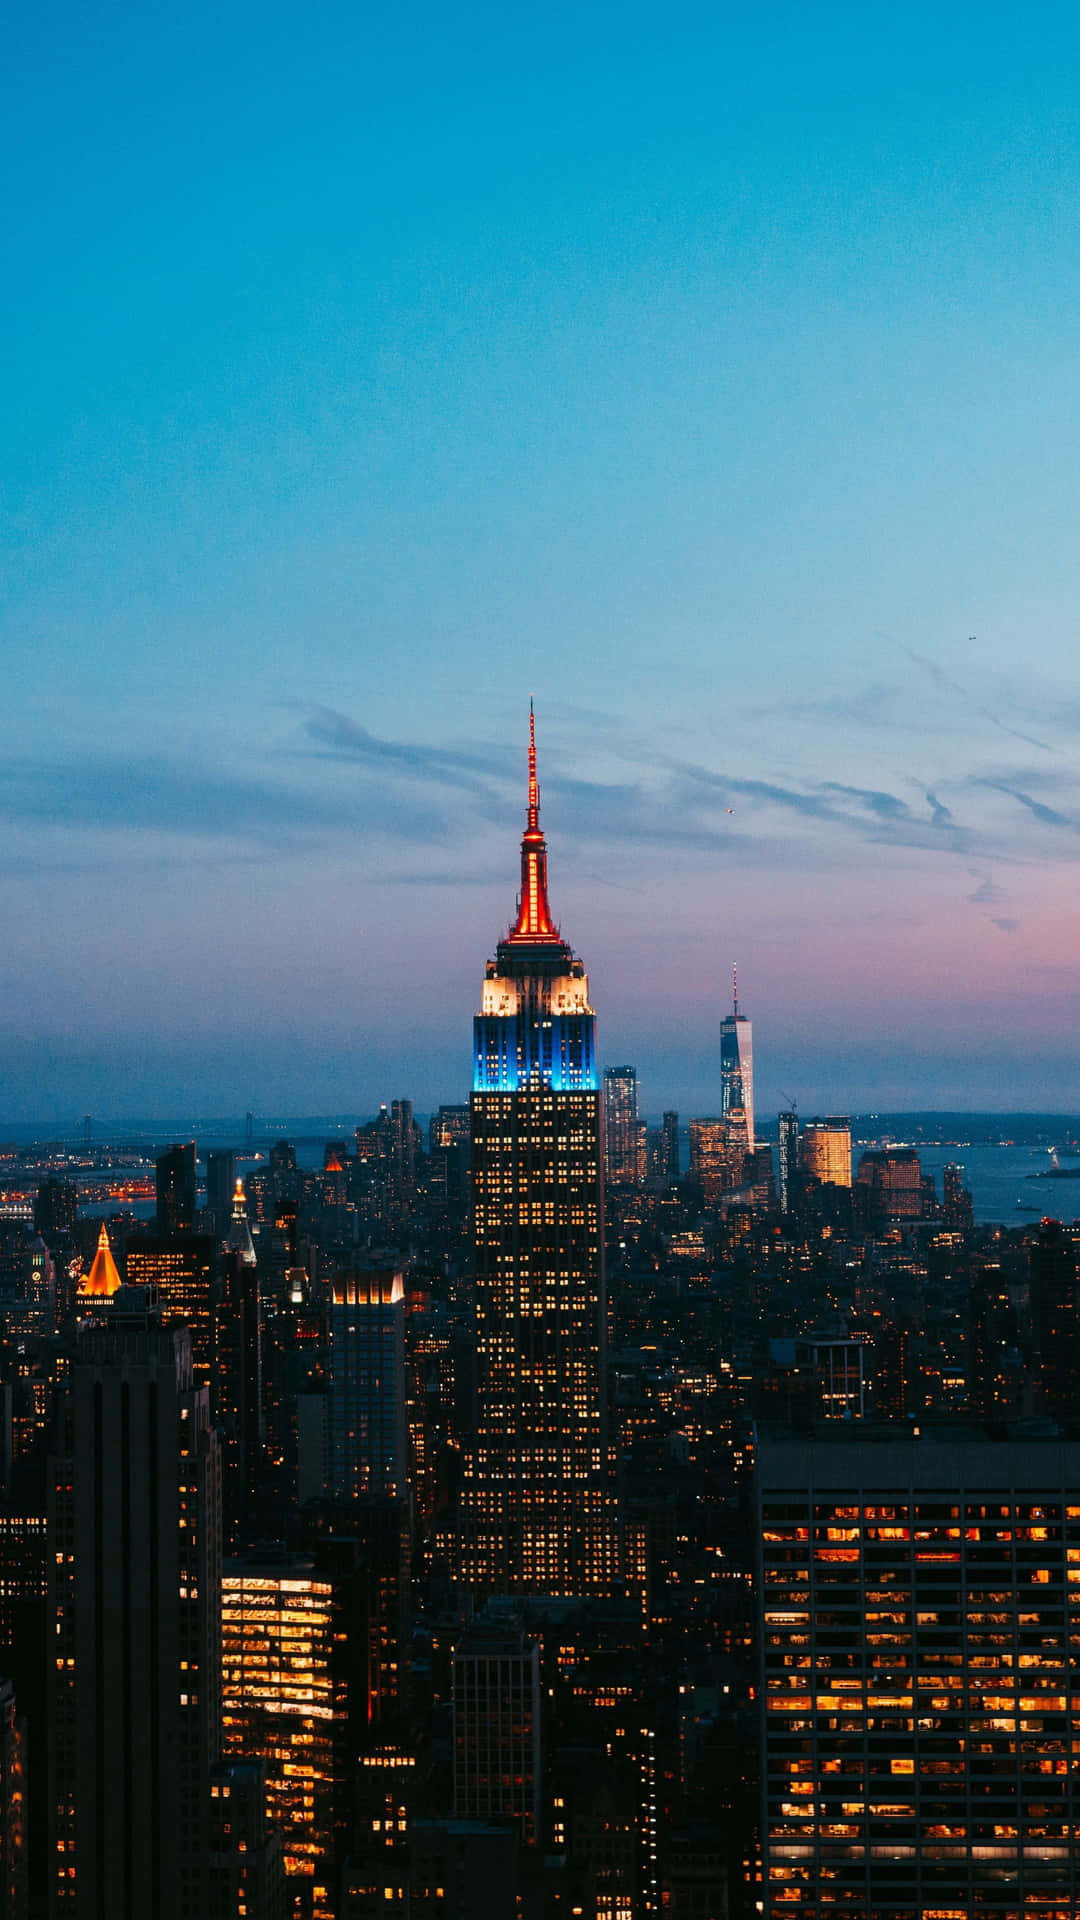 Enjoy the sights of New York City with this breathtaking Android wallpaper.